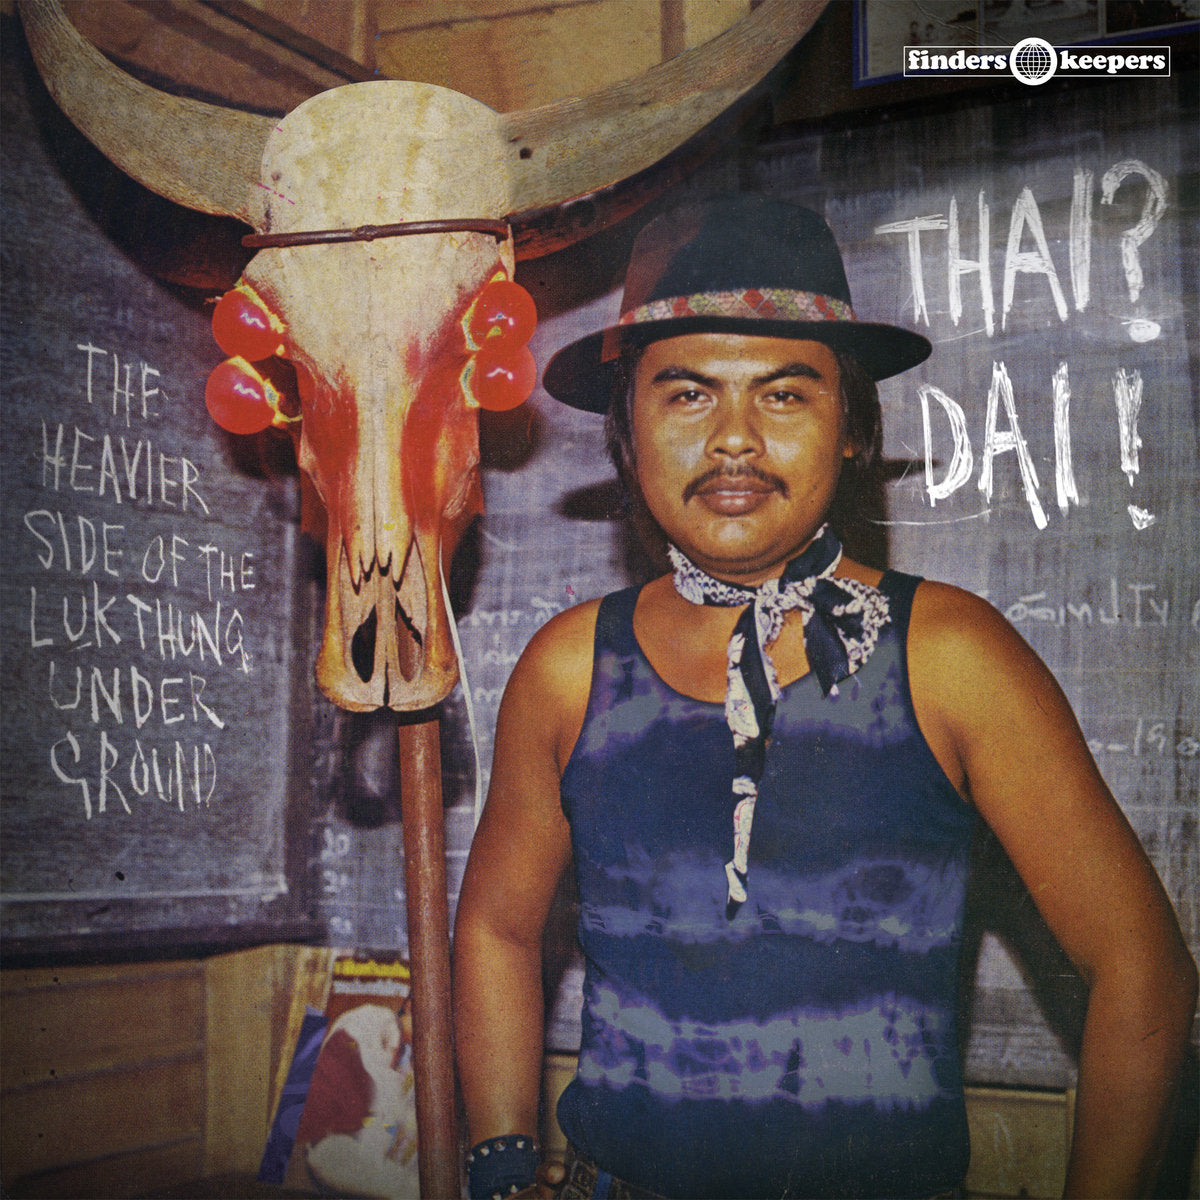 Thai? Dai! - The Heavier Side Of The Luk Thung Underground [Compilation]